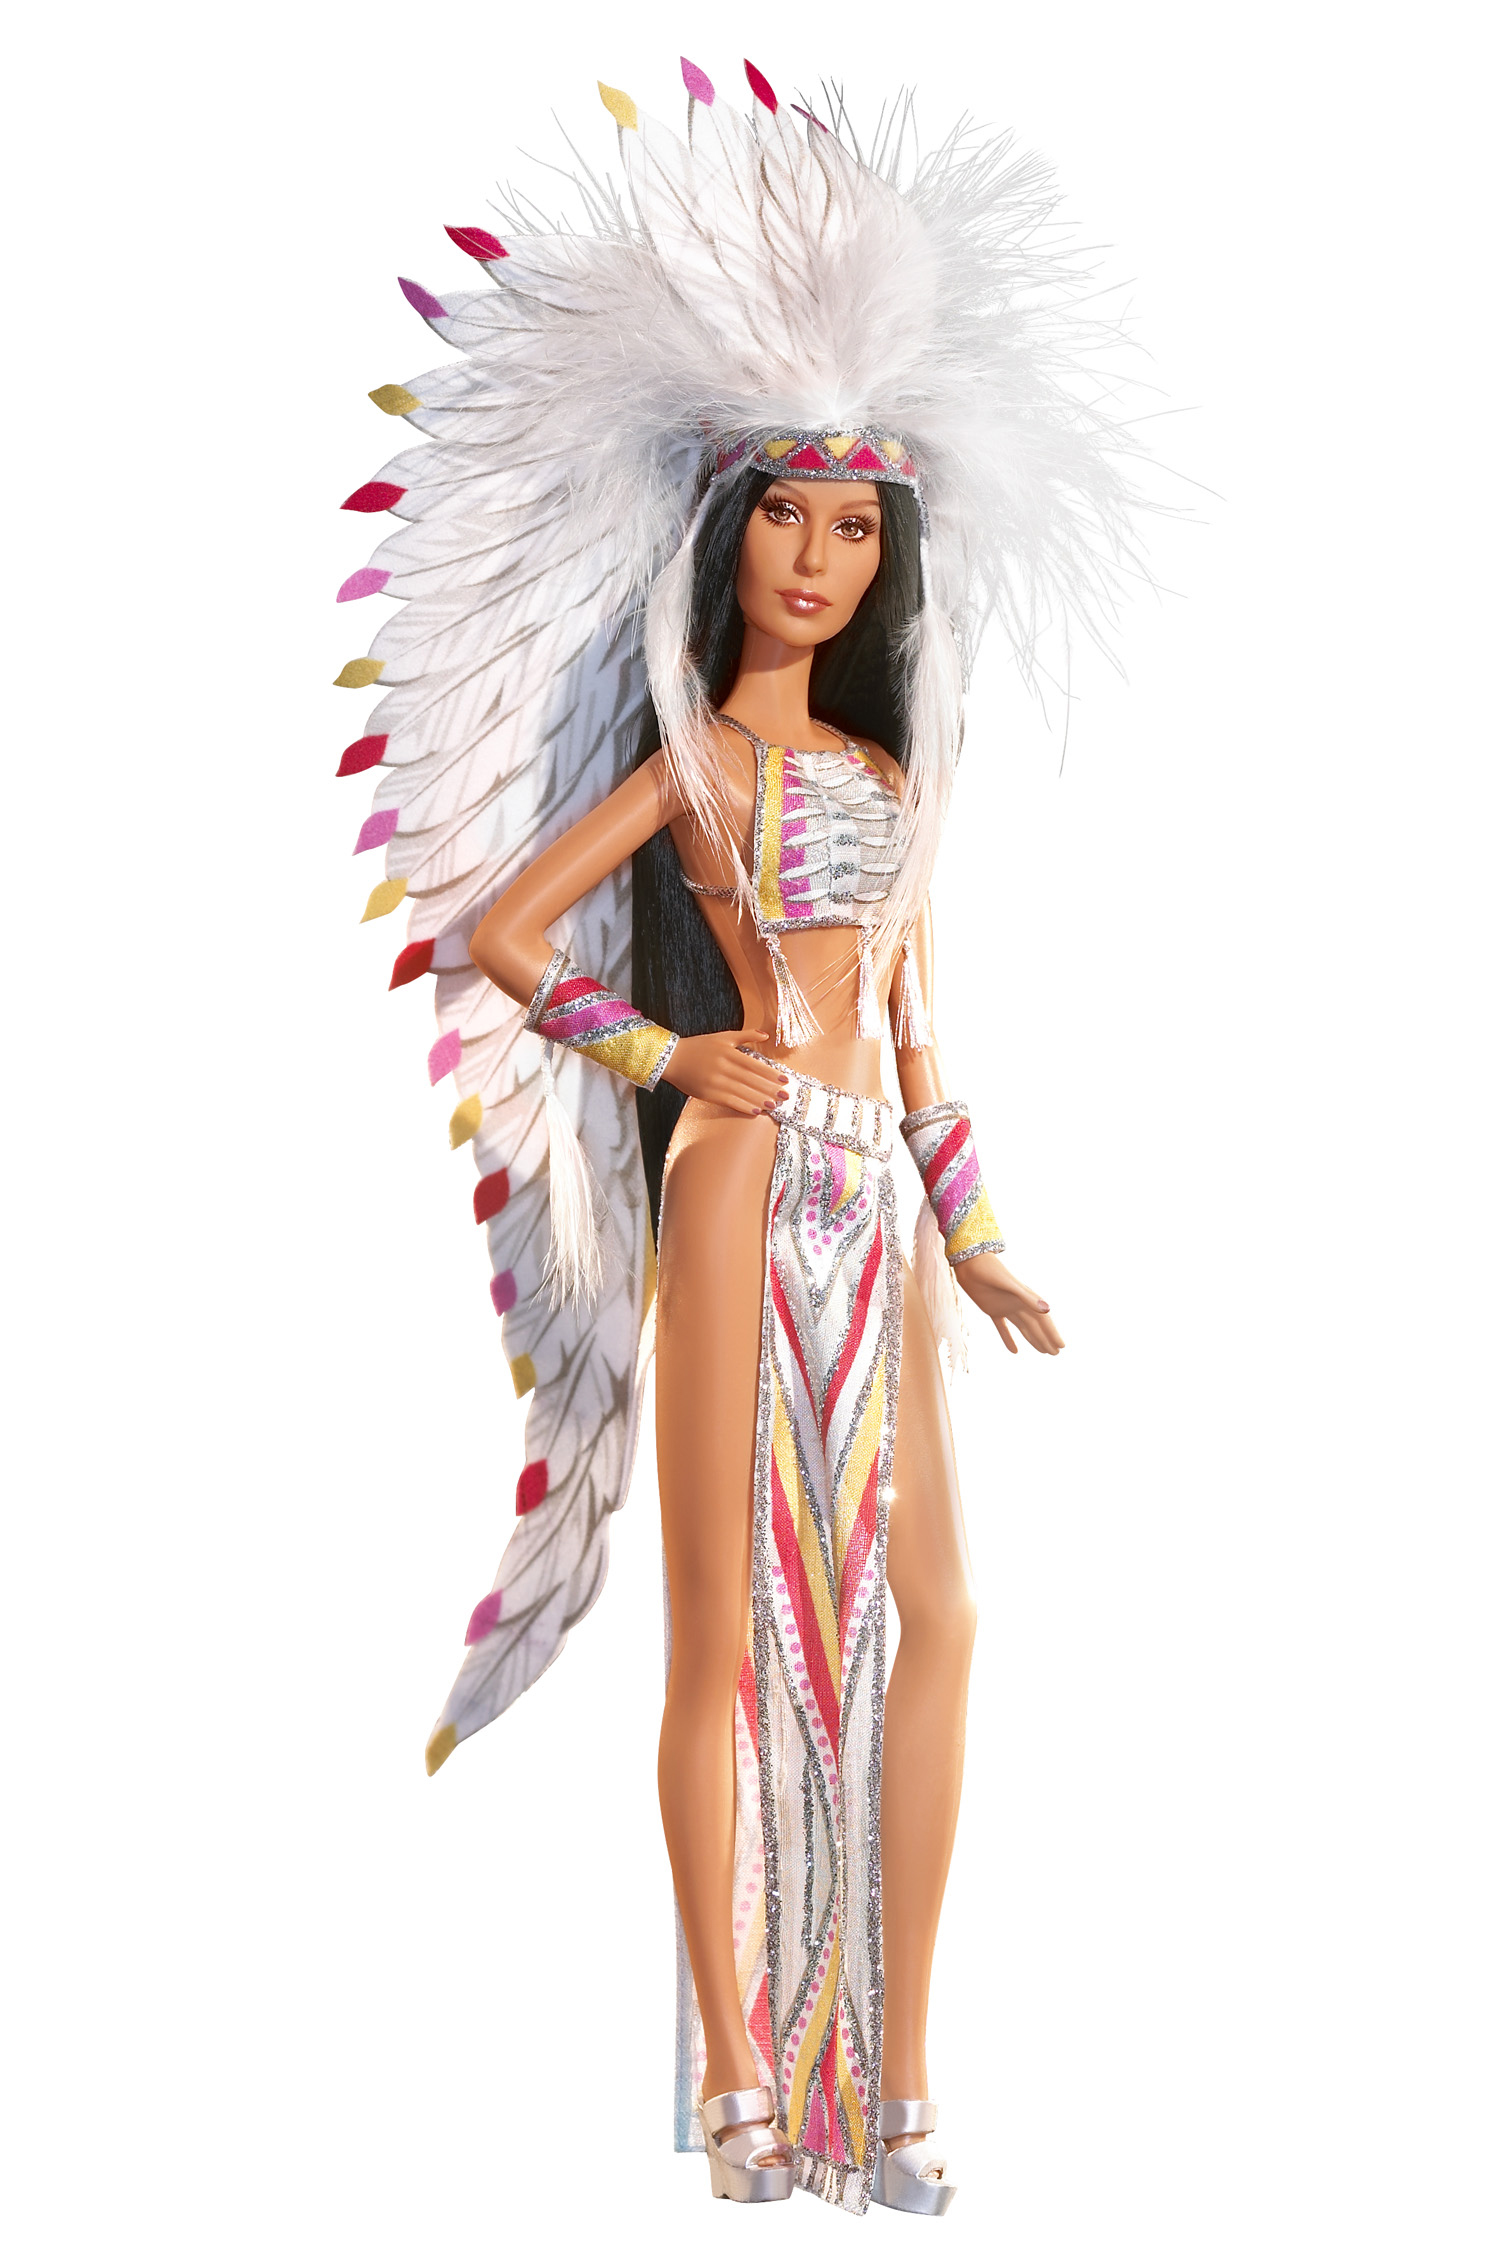 The 70's Cher Barbie, released in 2007.